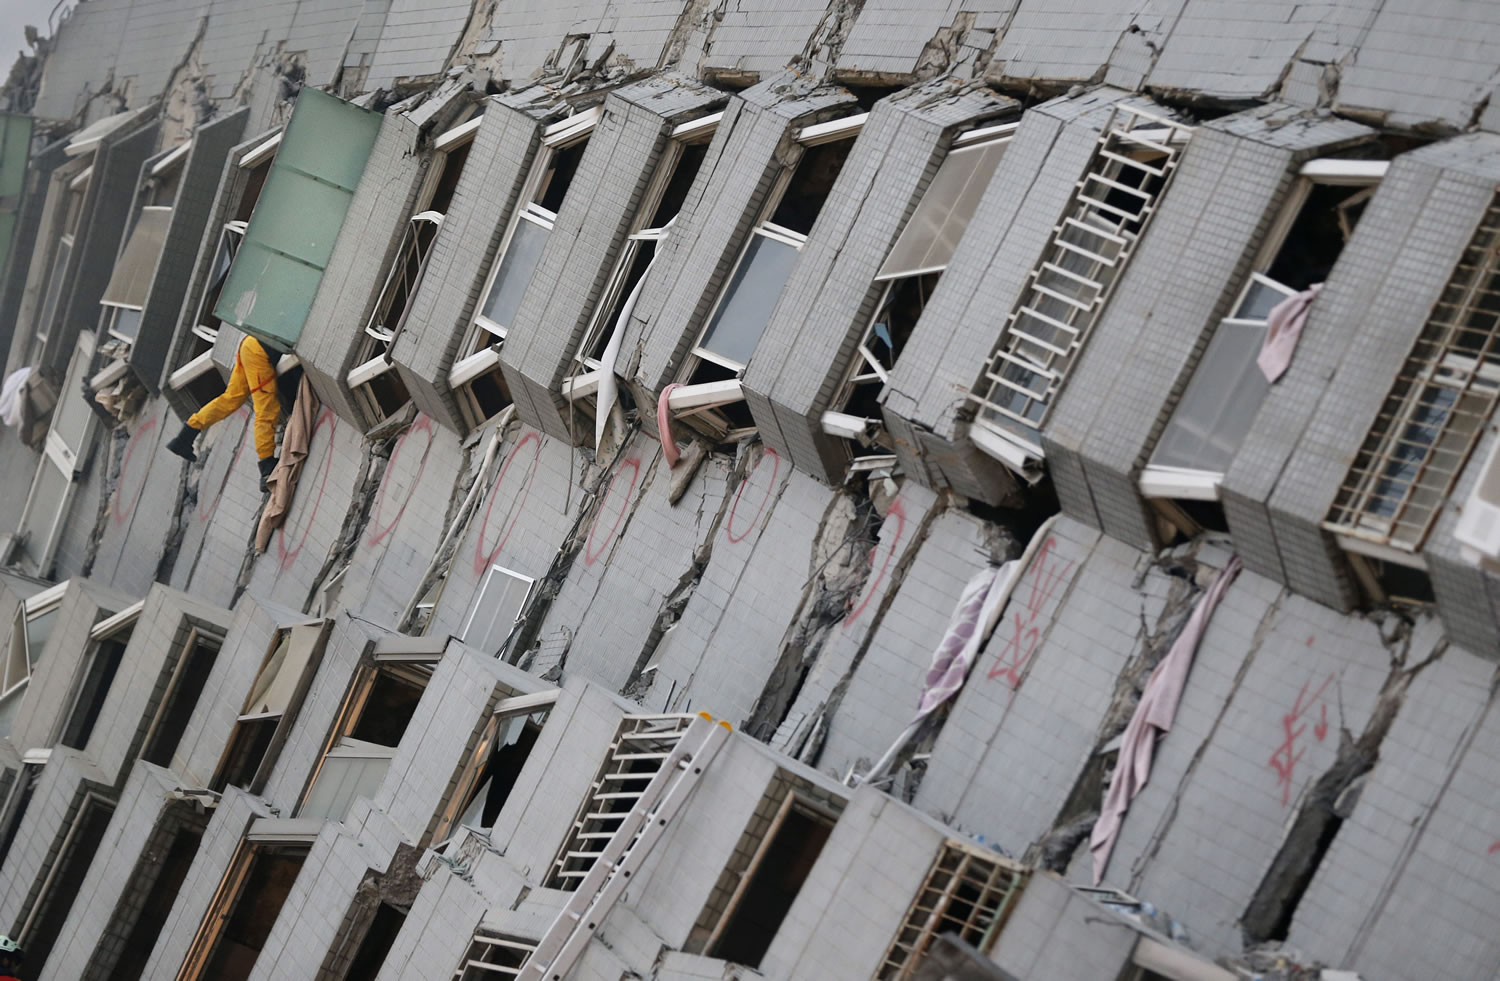 A rescue team member searches for missing people in a collapsed building, after an early morning earthquake in Tainan, Taiwan, Saturday, Feb. 6, 2016. A 6.4-magnitude earthquake struck southern Taiwan early Saturday, toppling at least one high-rise residential building and trapping people inside.